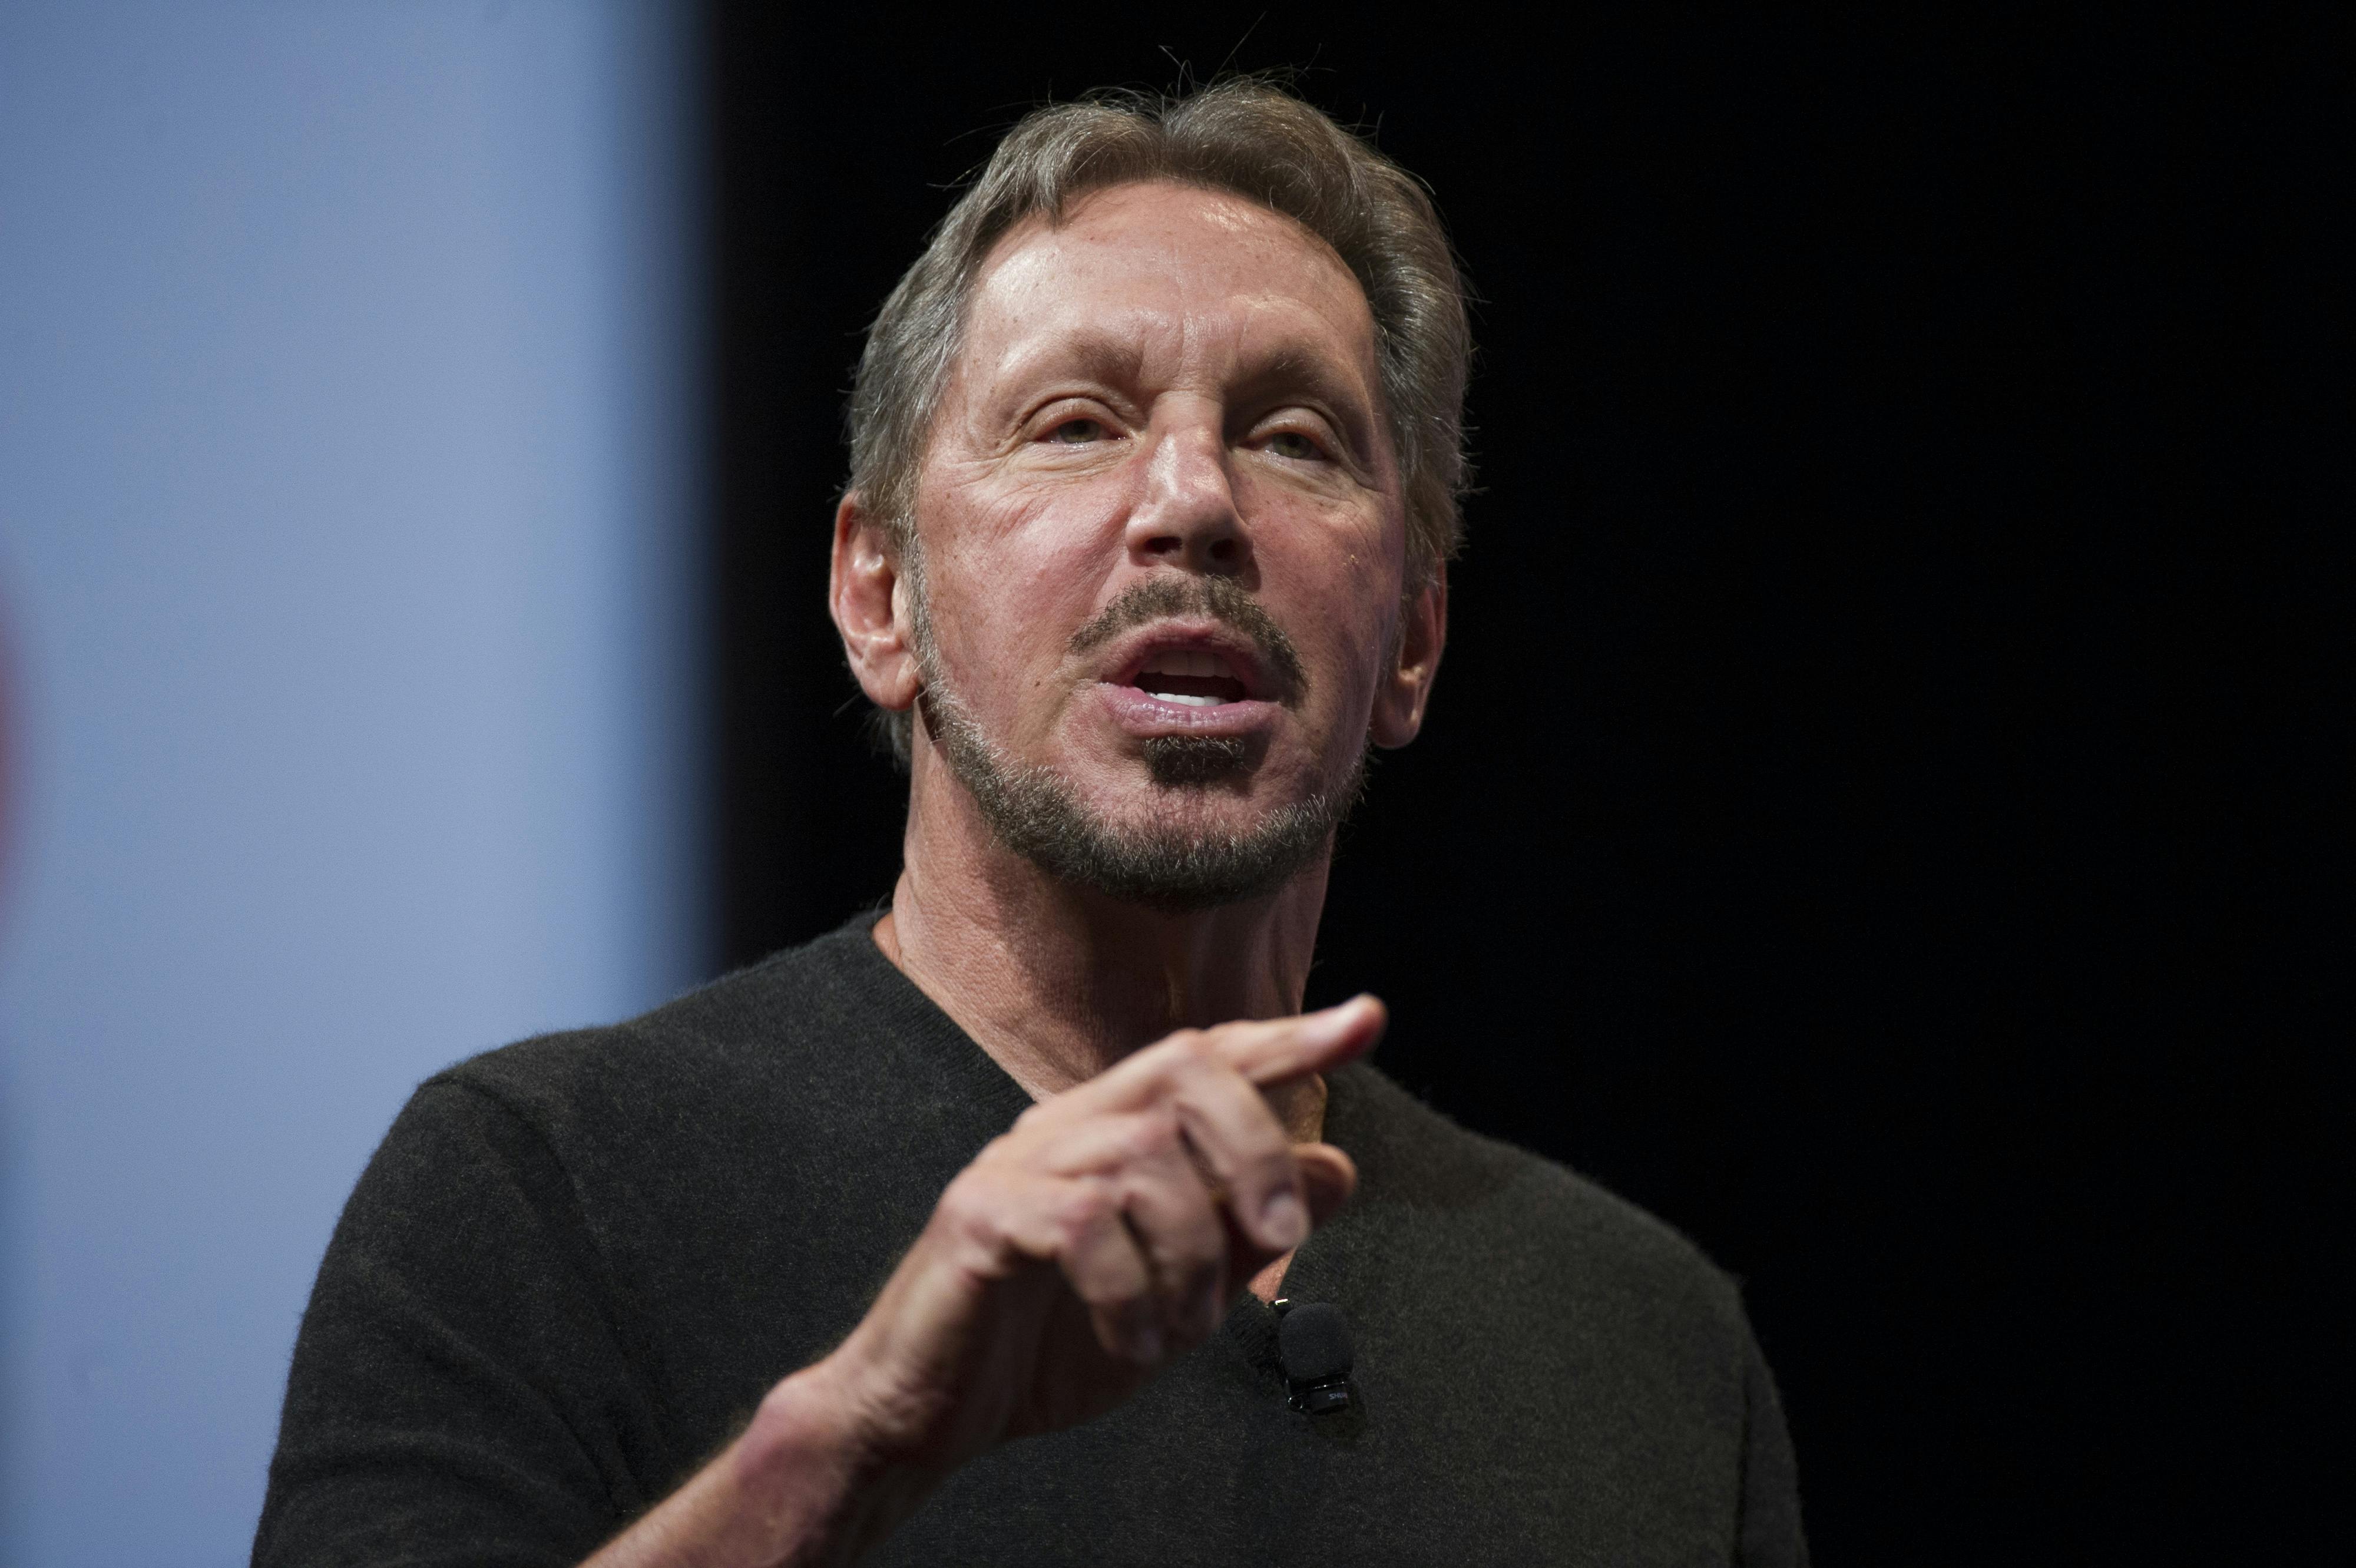 LARRY ELLISON: THE CO-FOUNDER AND EXECUTIVE CHAIRMAN OF ORACLE CORPORATION